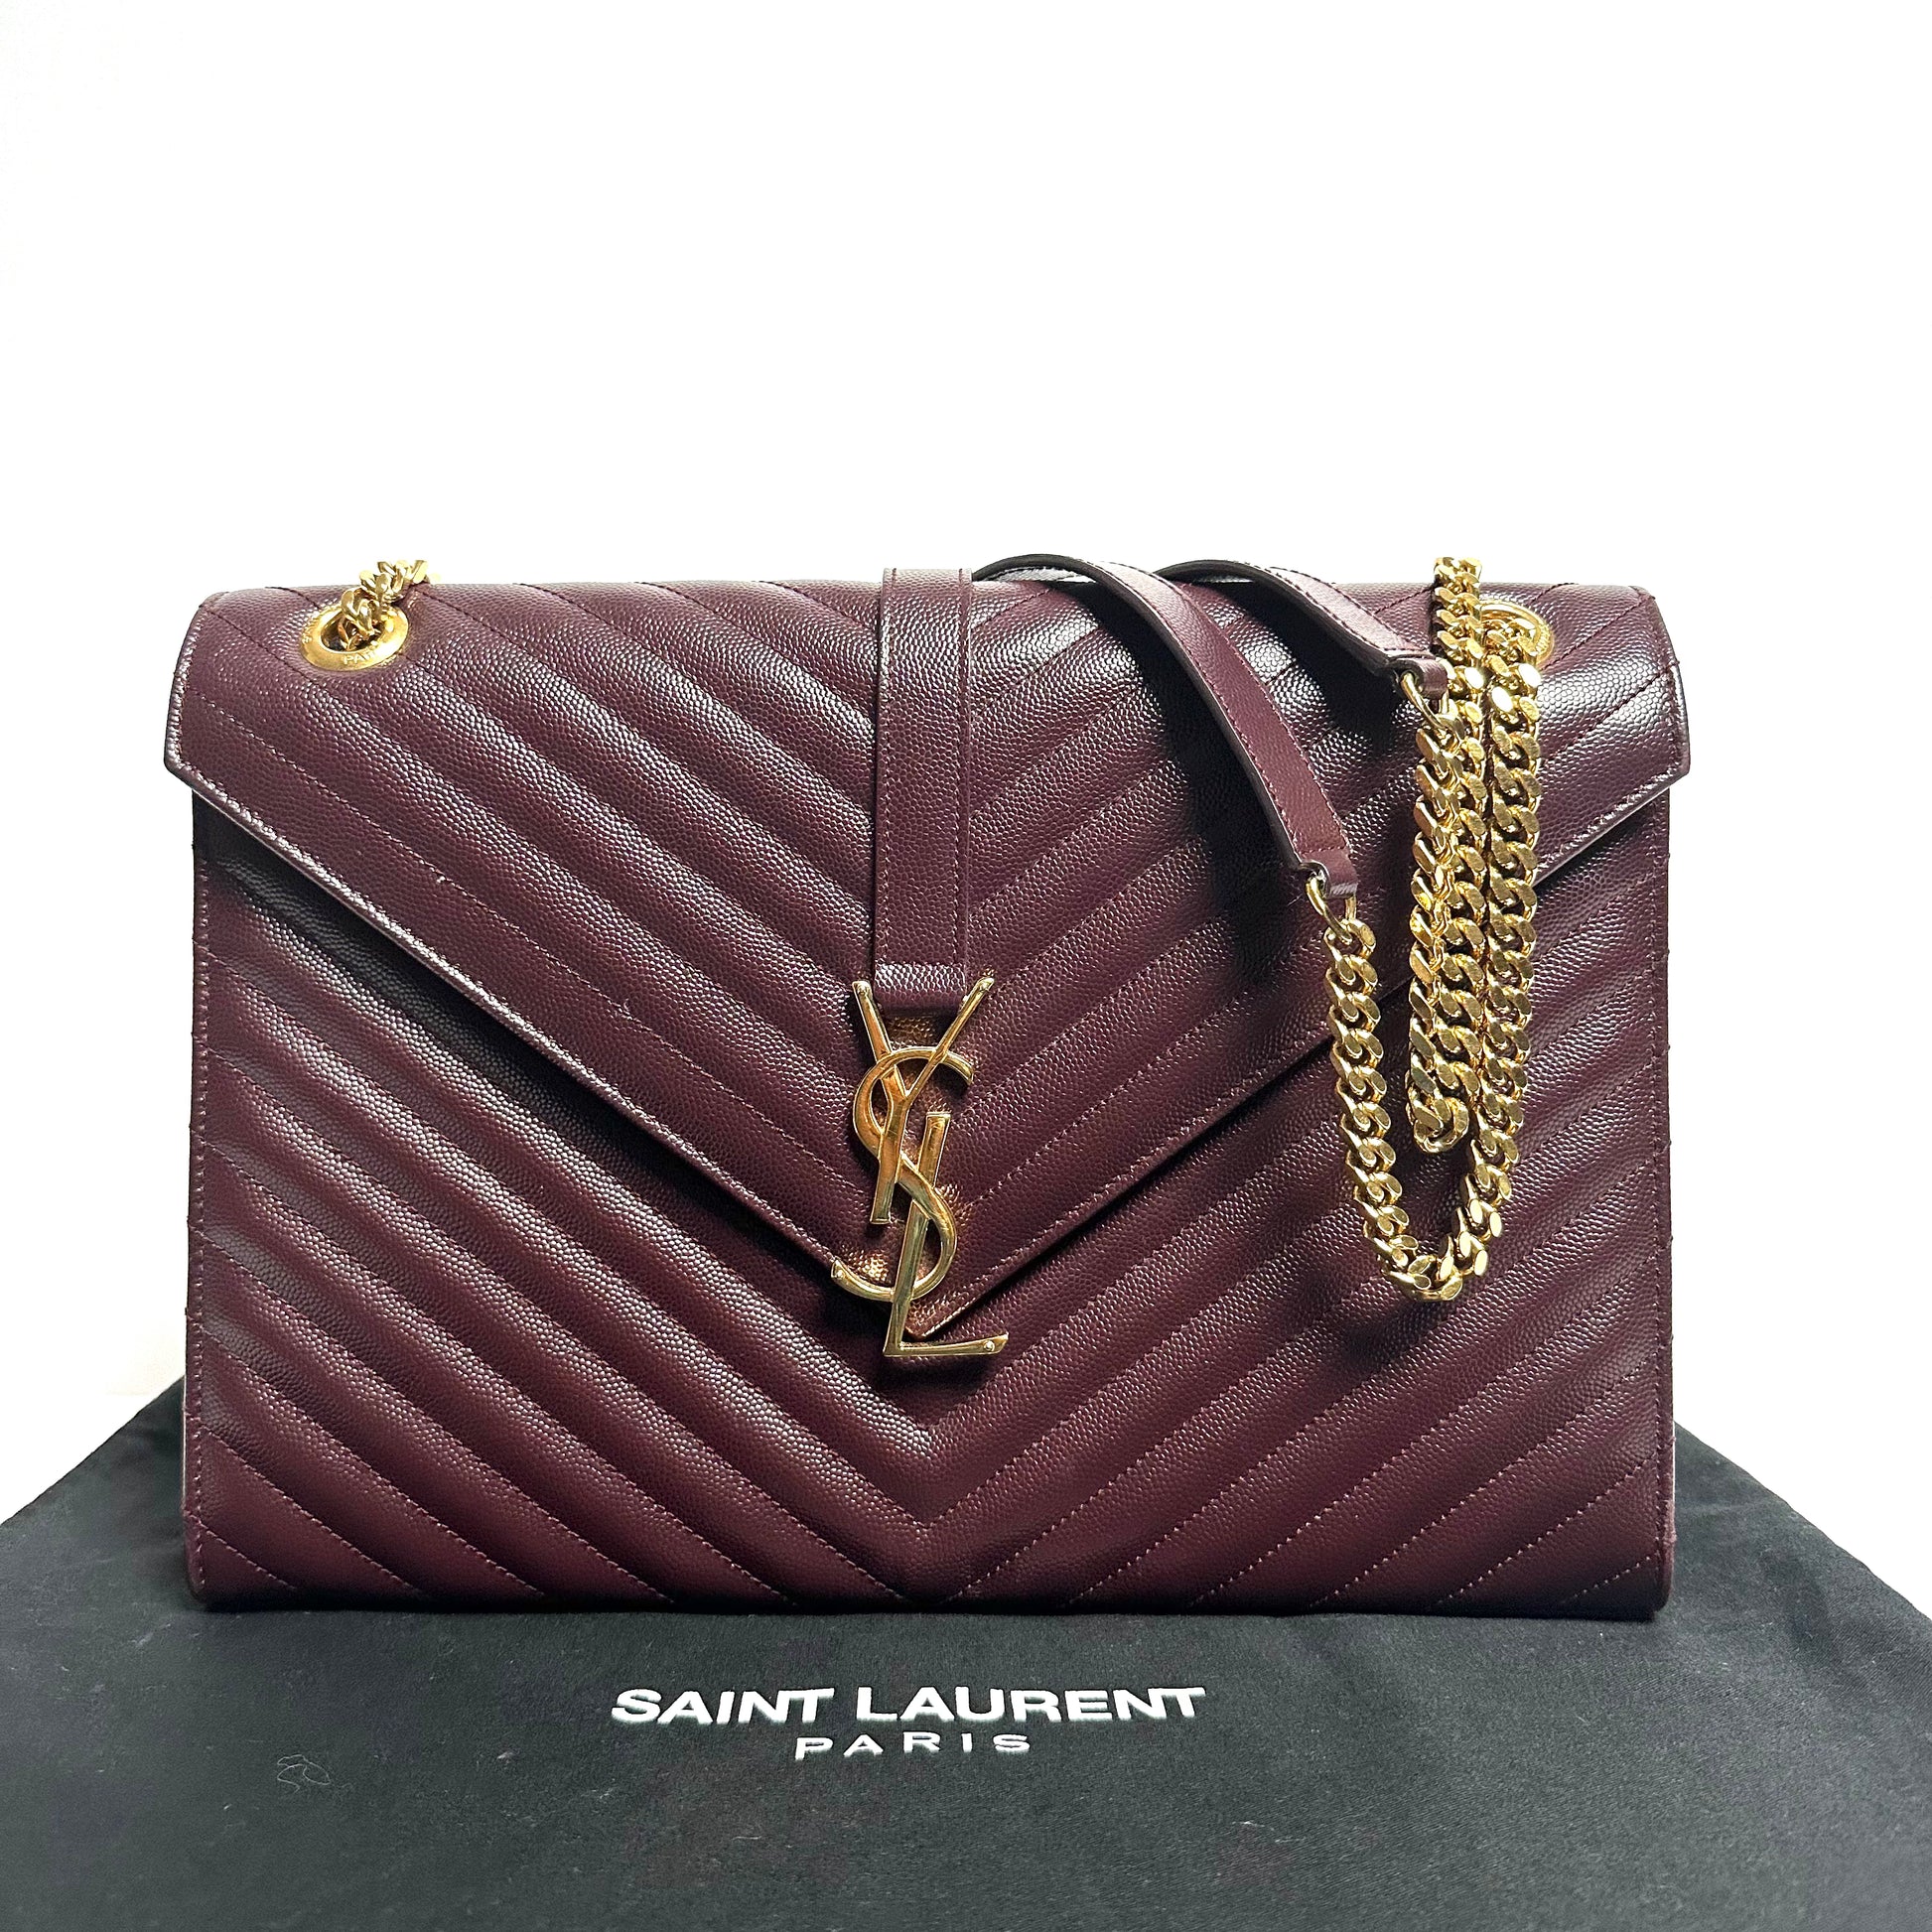 Saint Laurent, Bags, Saint Laurent Red Bag With Silver Chain Comes With Original  Bag And Box